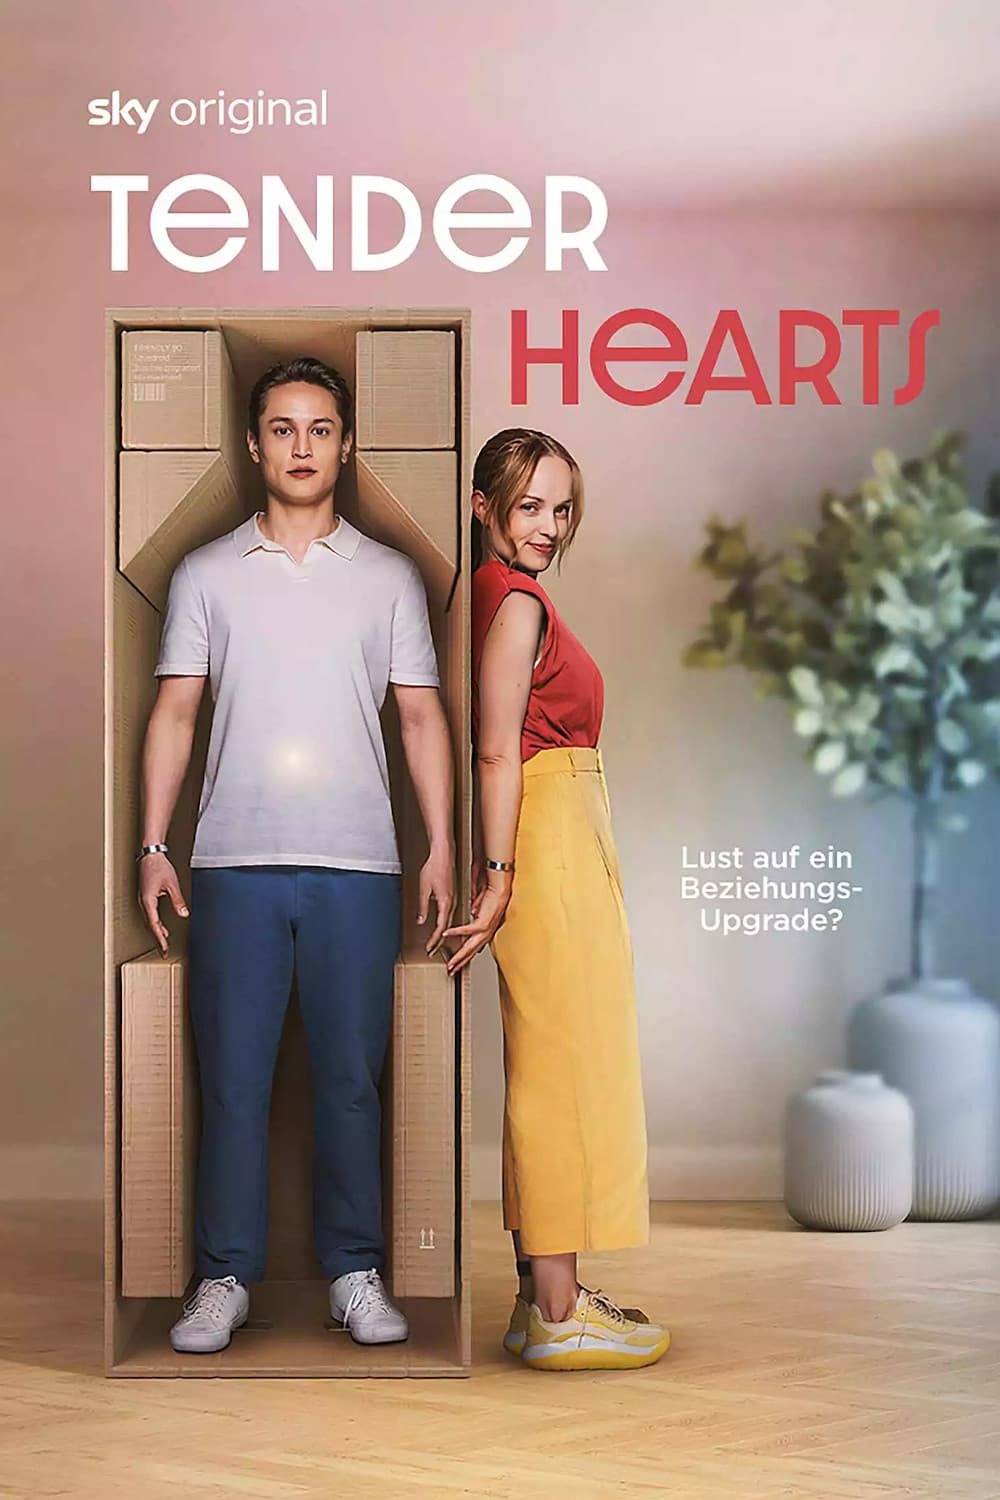 Tender Hearts TV Shows About Android